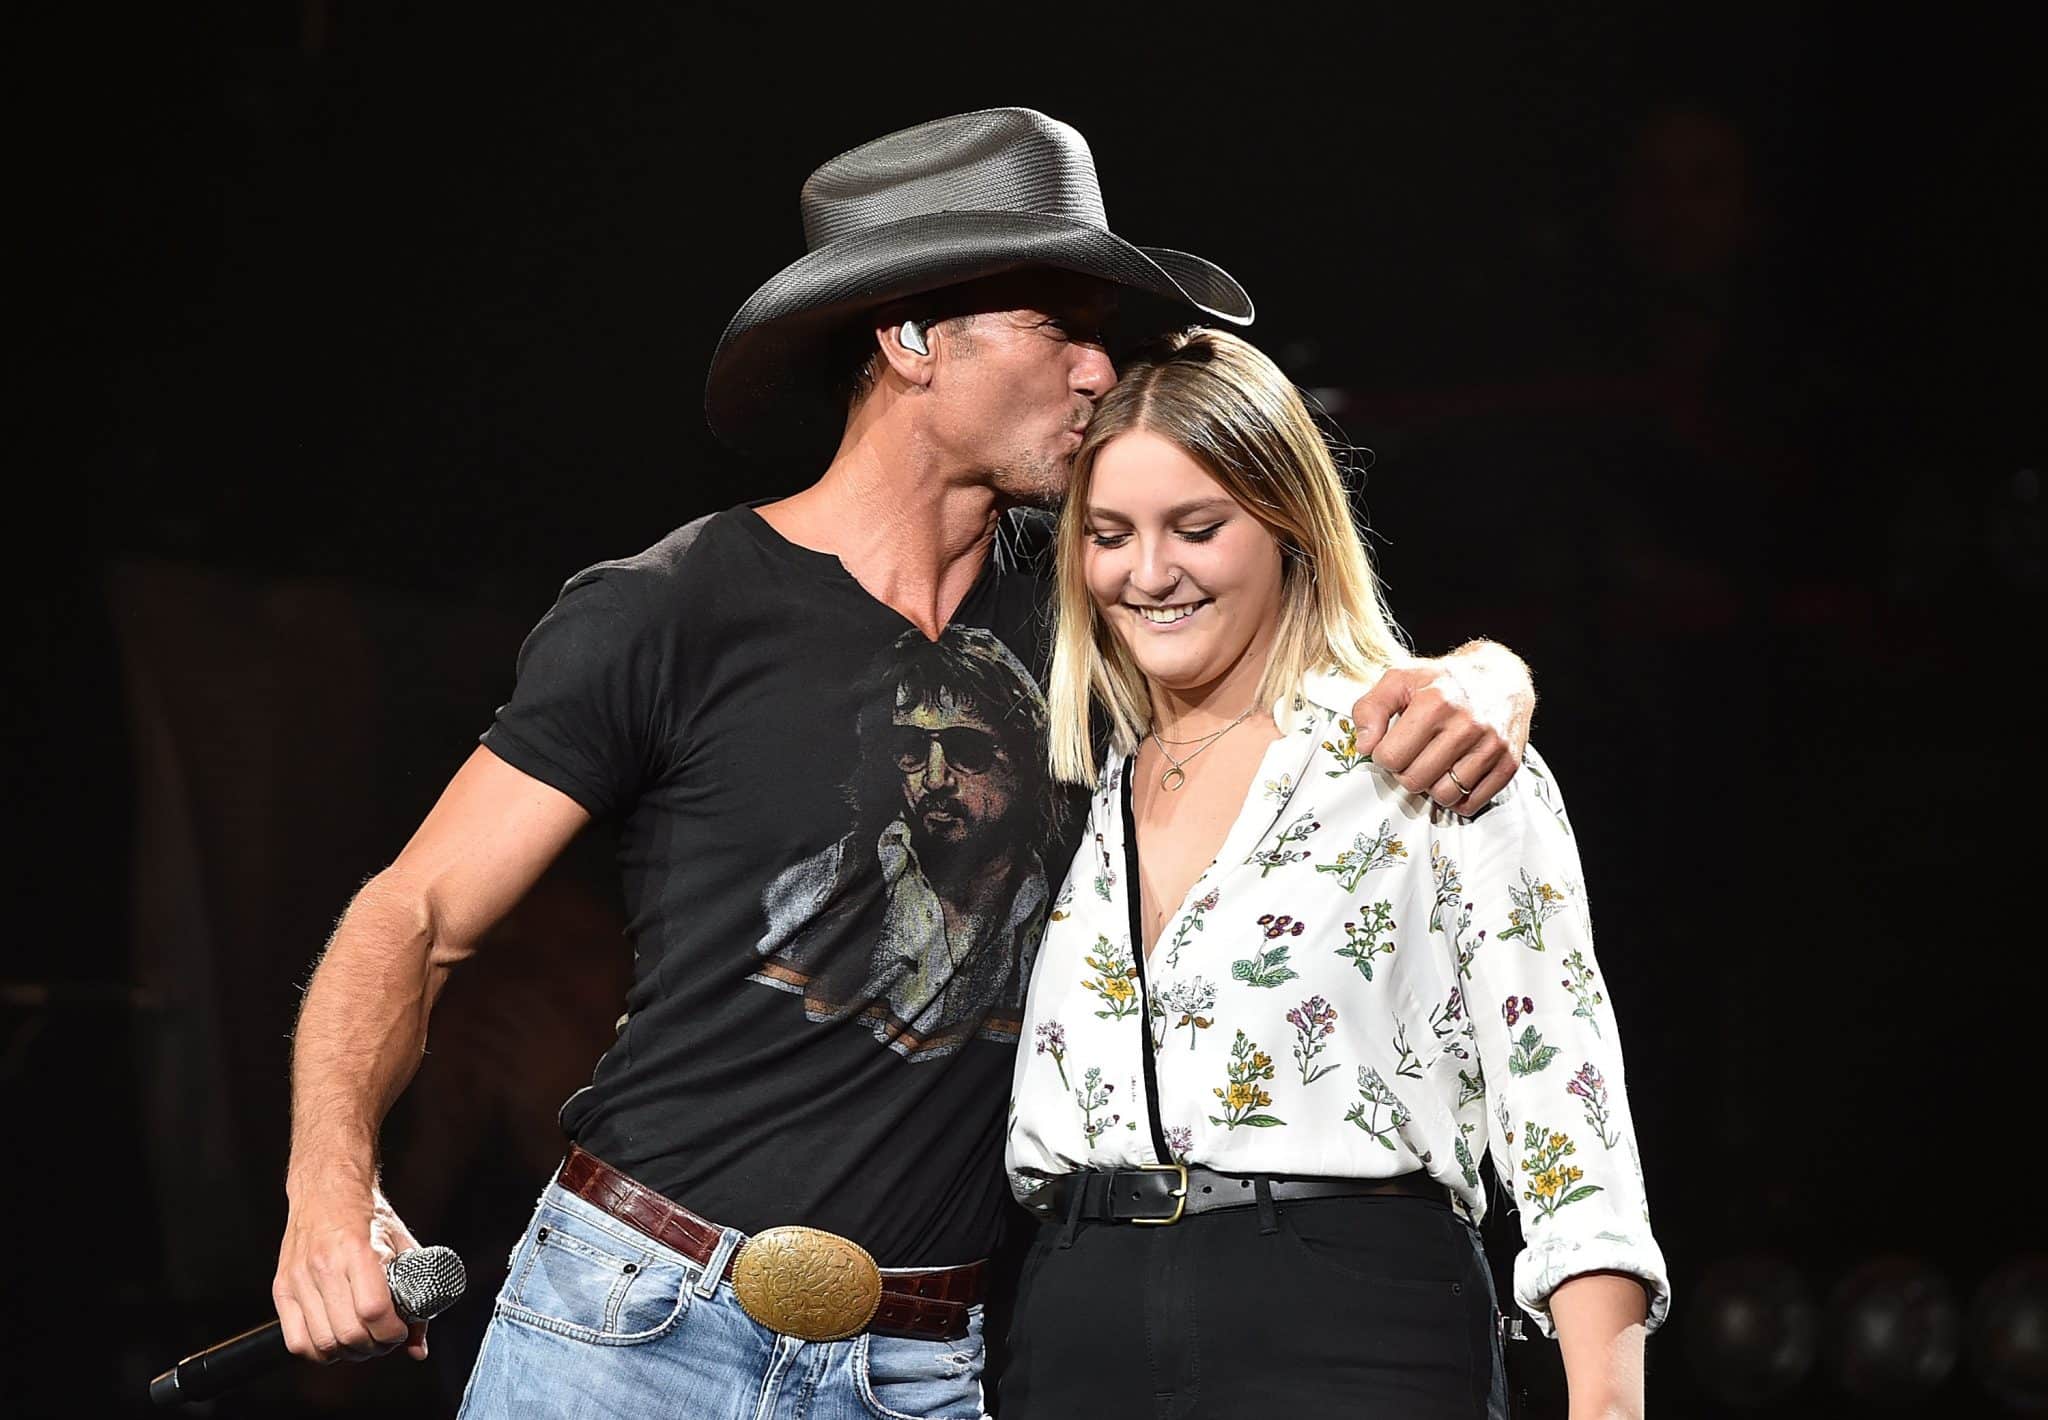 NASHVILLE, TN - AUGUST 15: Musician Tim McGraw, left, performs with his daughter Gracie McGraw on the "Shotgun Rider" tour at Bridgestone Arena on August 15, 2015 in Nashville, Tennessee. (Photo by John Shearer/Getty Images for Big Machine Records)